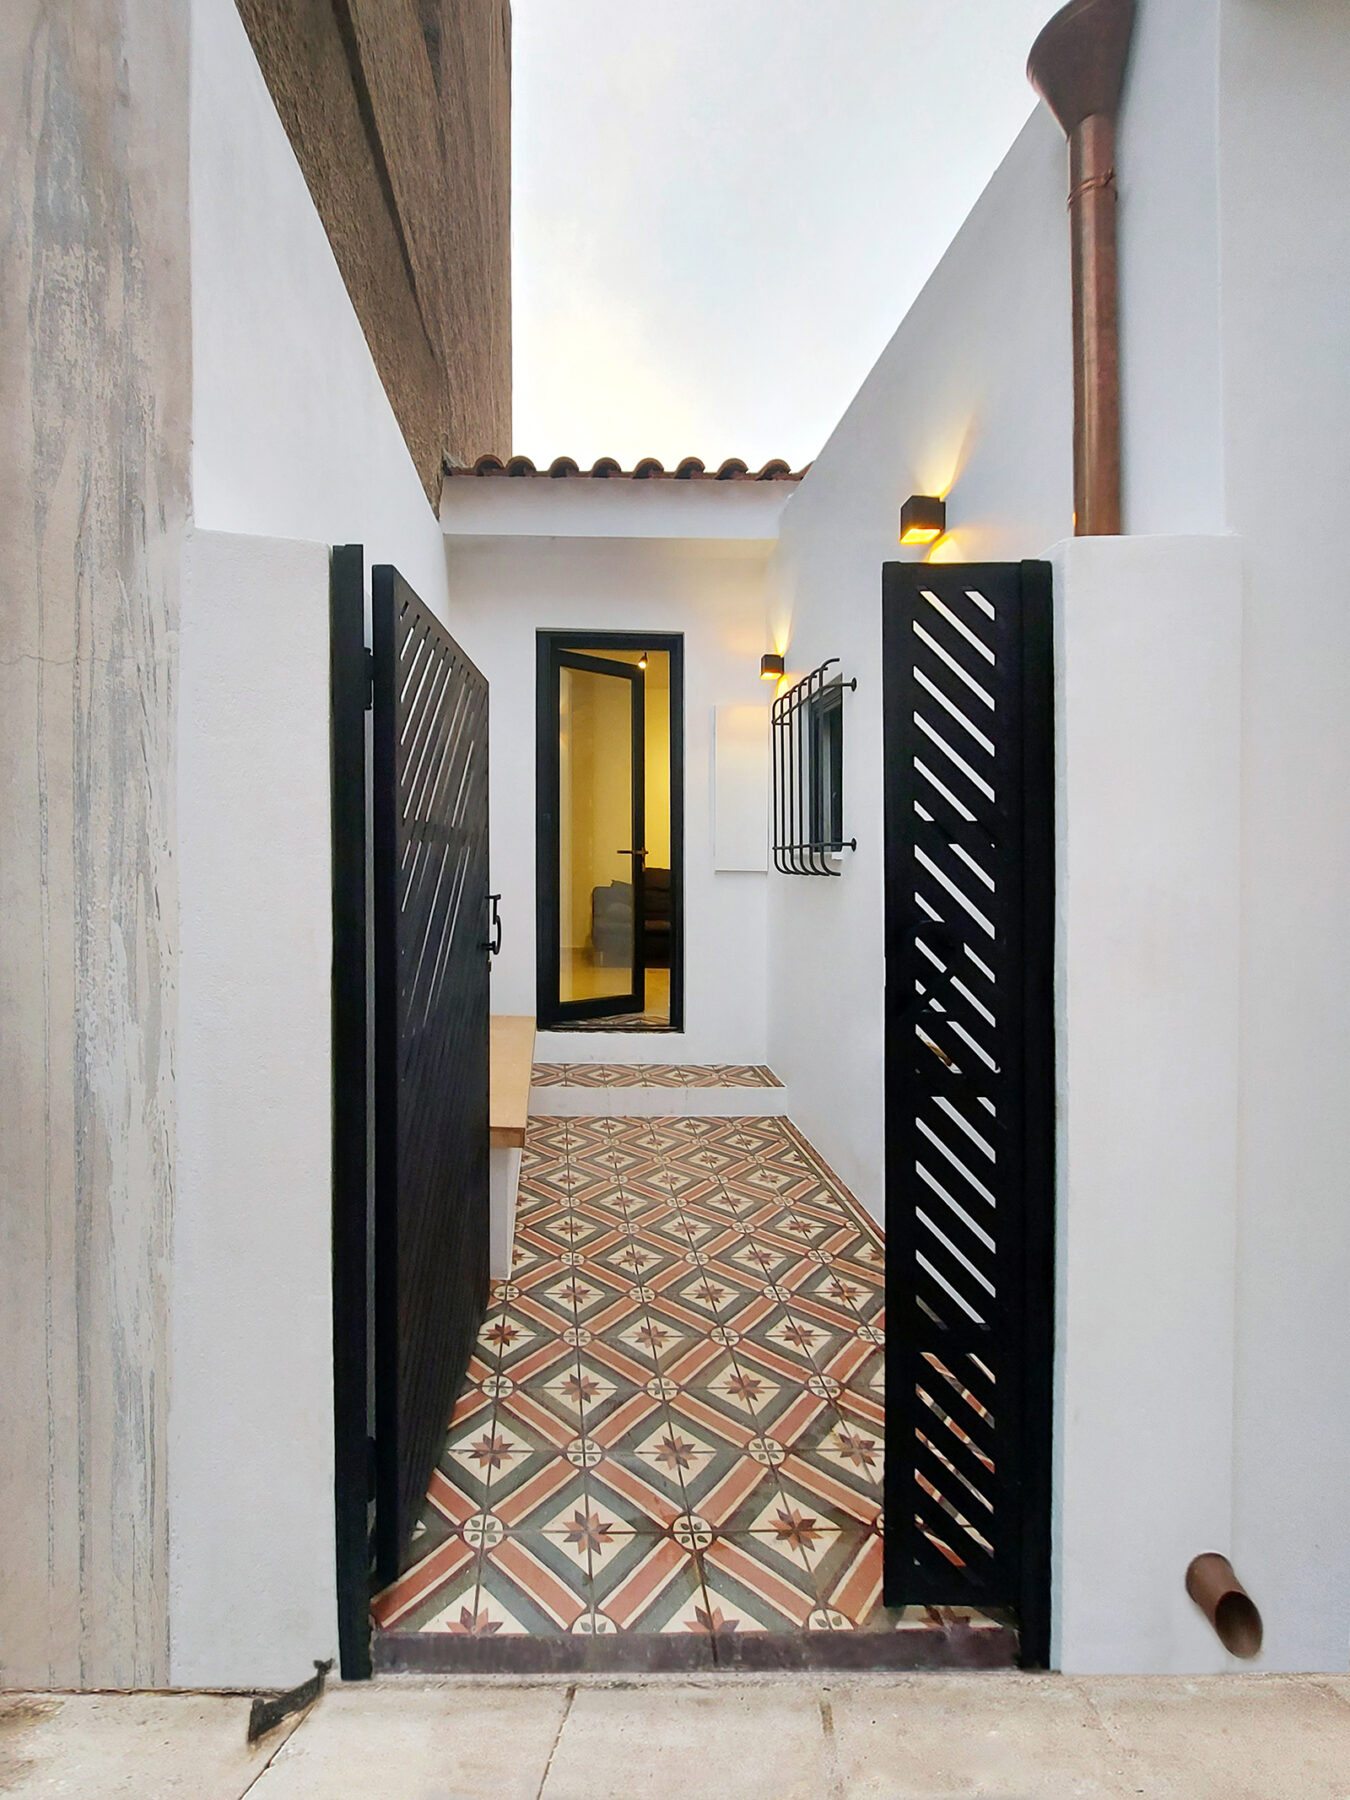 Archisearch Interior architect Efi Drakopoulou renovates a 1920's refugee residence with terrace in the historical district of Nikea, Piraeus, Greece